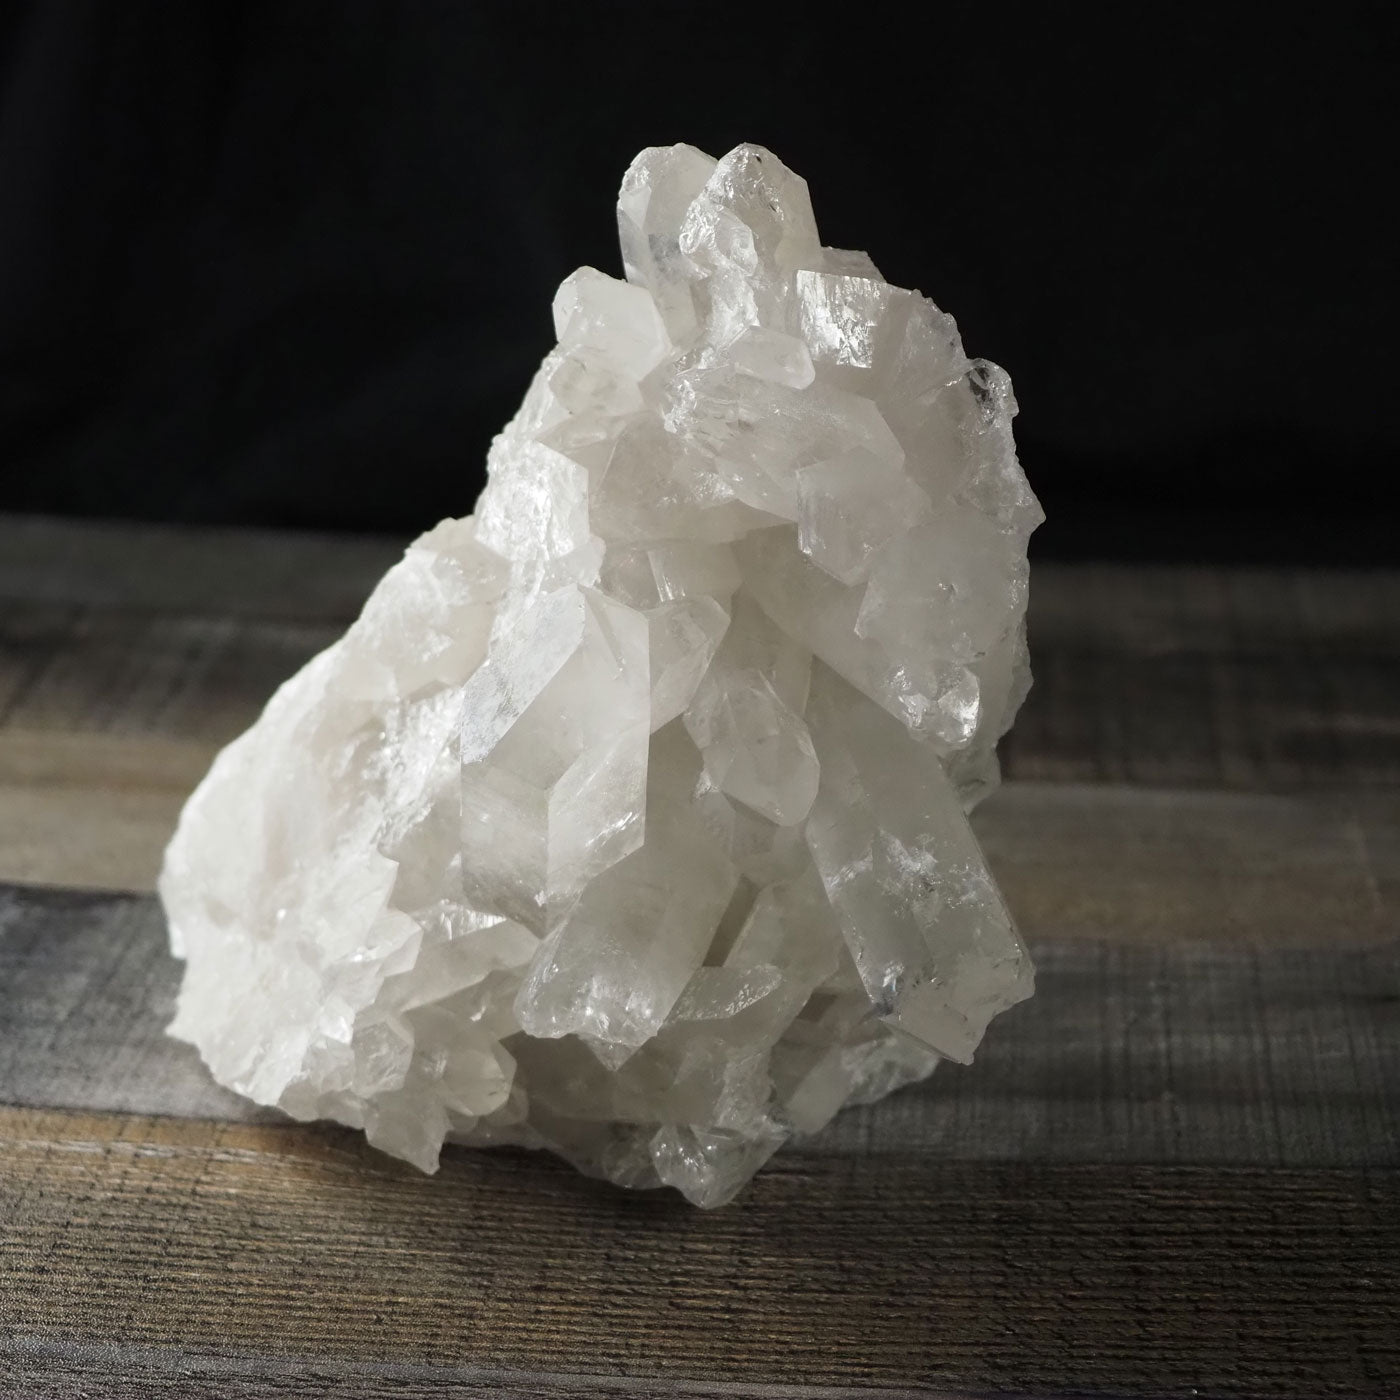 Extra large, stunning Brazilian quartz cluster that is 7.5" wide and 7.5" tall, weighing just over 5 lb.